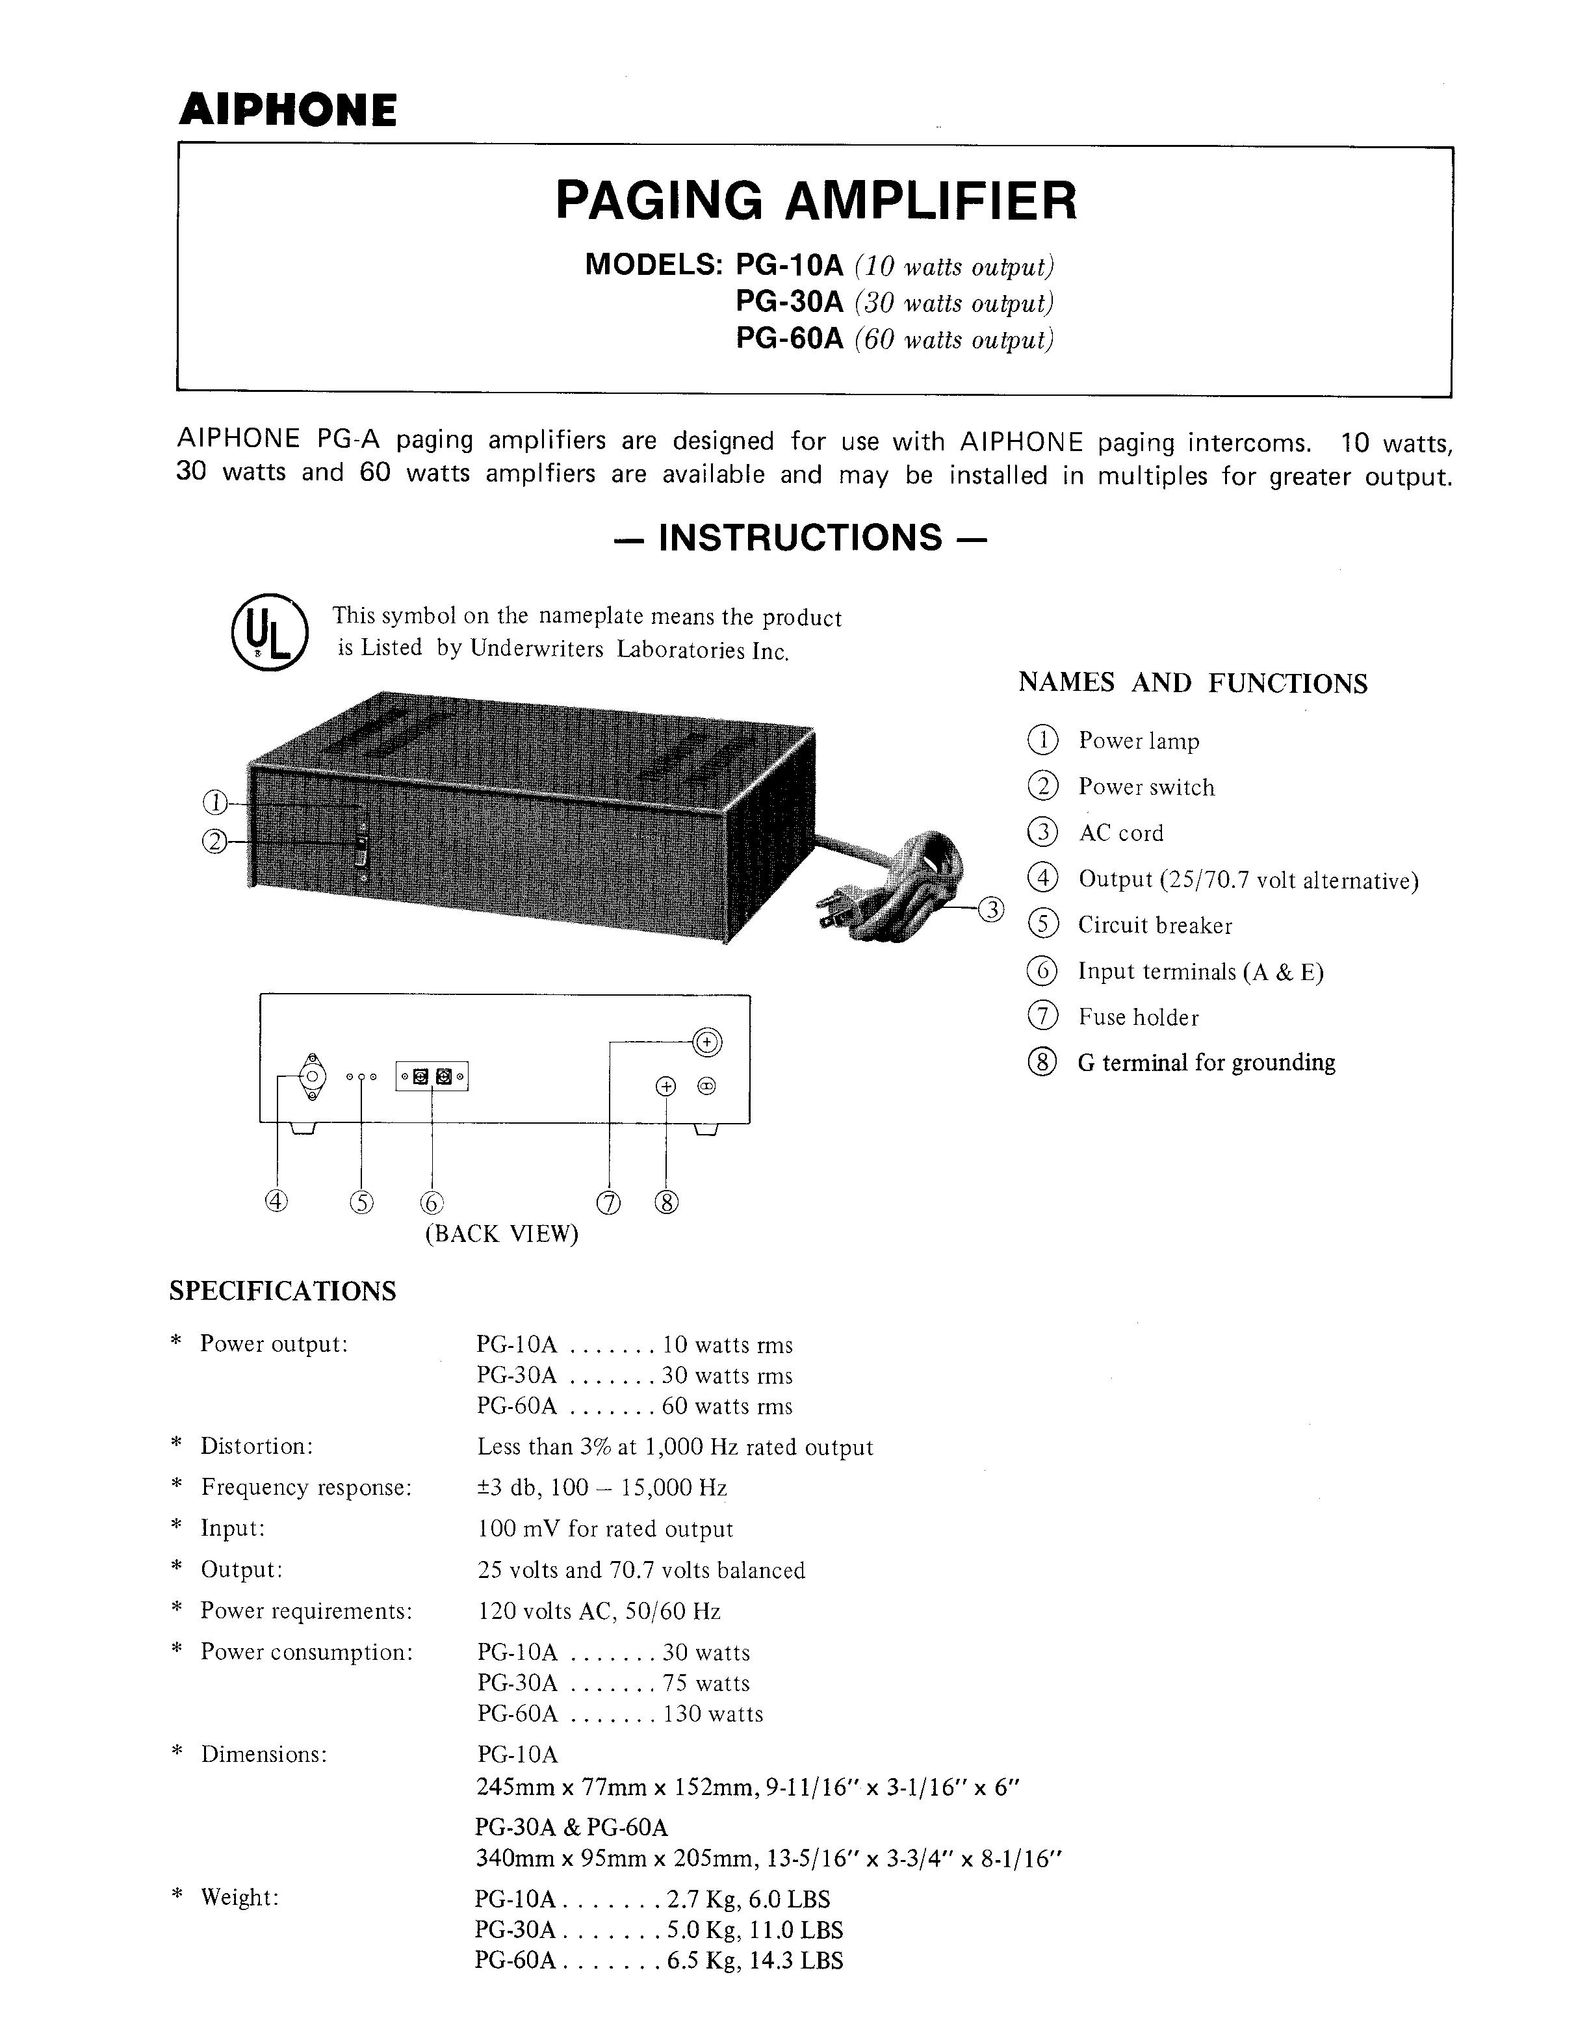 Aiphone PG-10A Amplified Phone User Manual